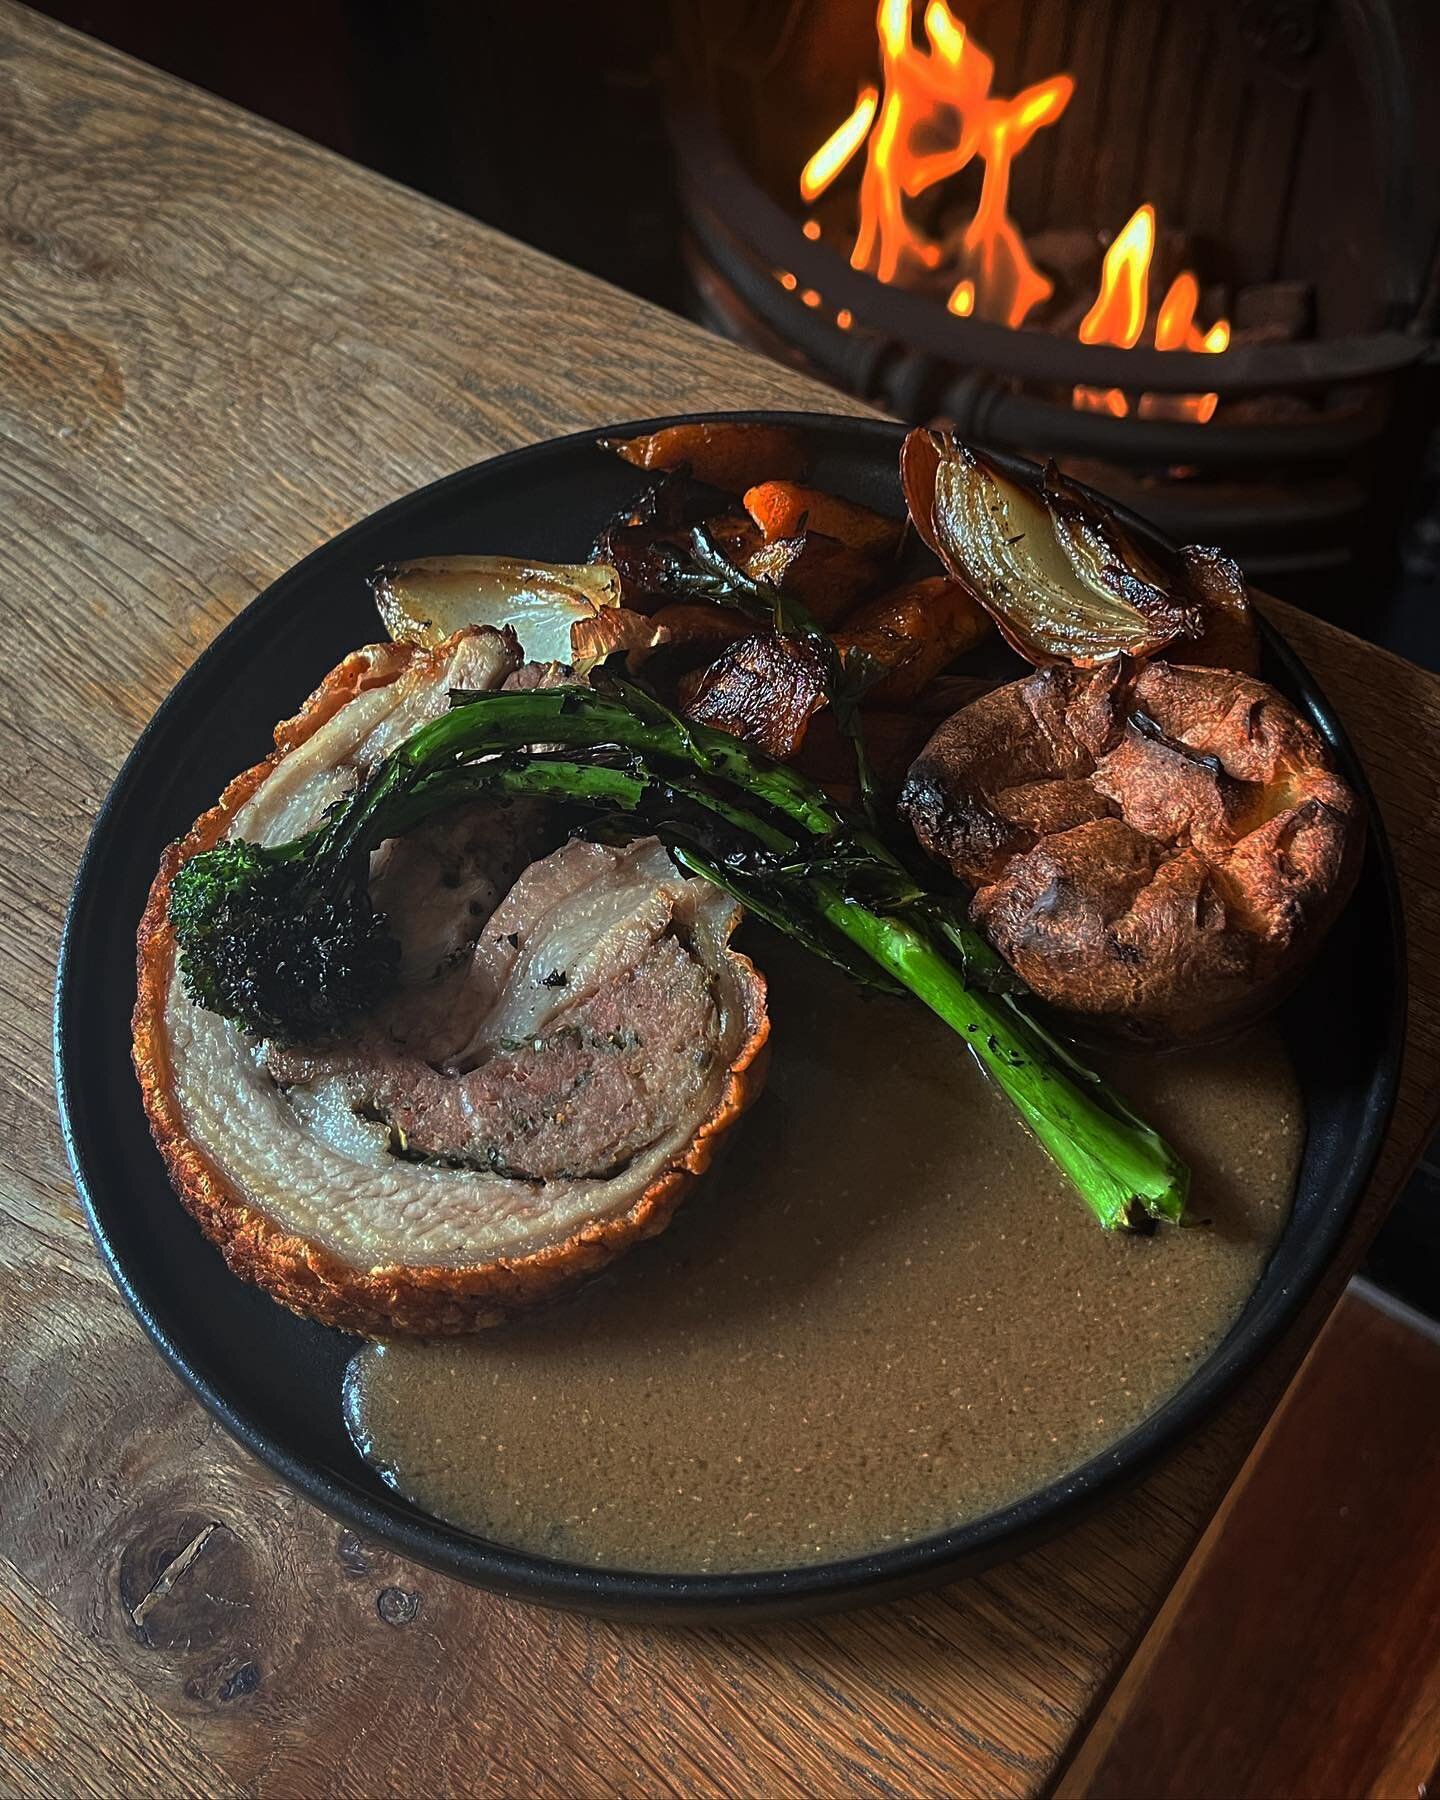 Adding &ldquo;Sunday Roast&rdquo; to the weekly specials roster. Starting from 4pm tomorrow, enjoy roast pork or chicken with seasonal veggies and Yorkshire pudding for $32. Stay tuned for Sunday lunches ✌🏽